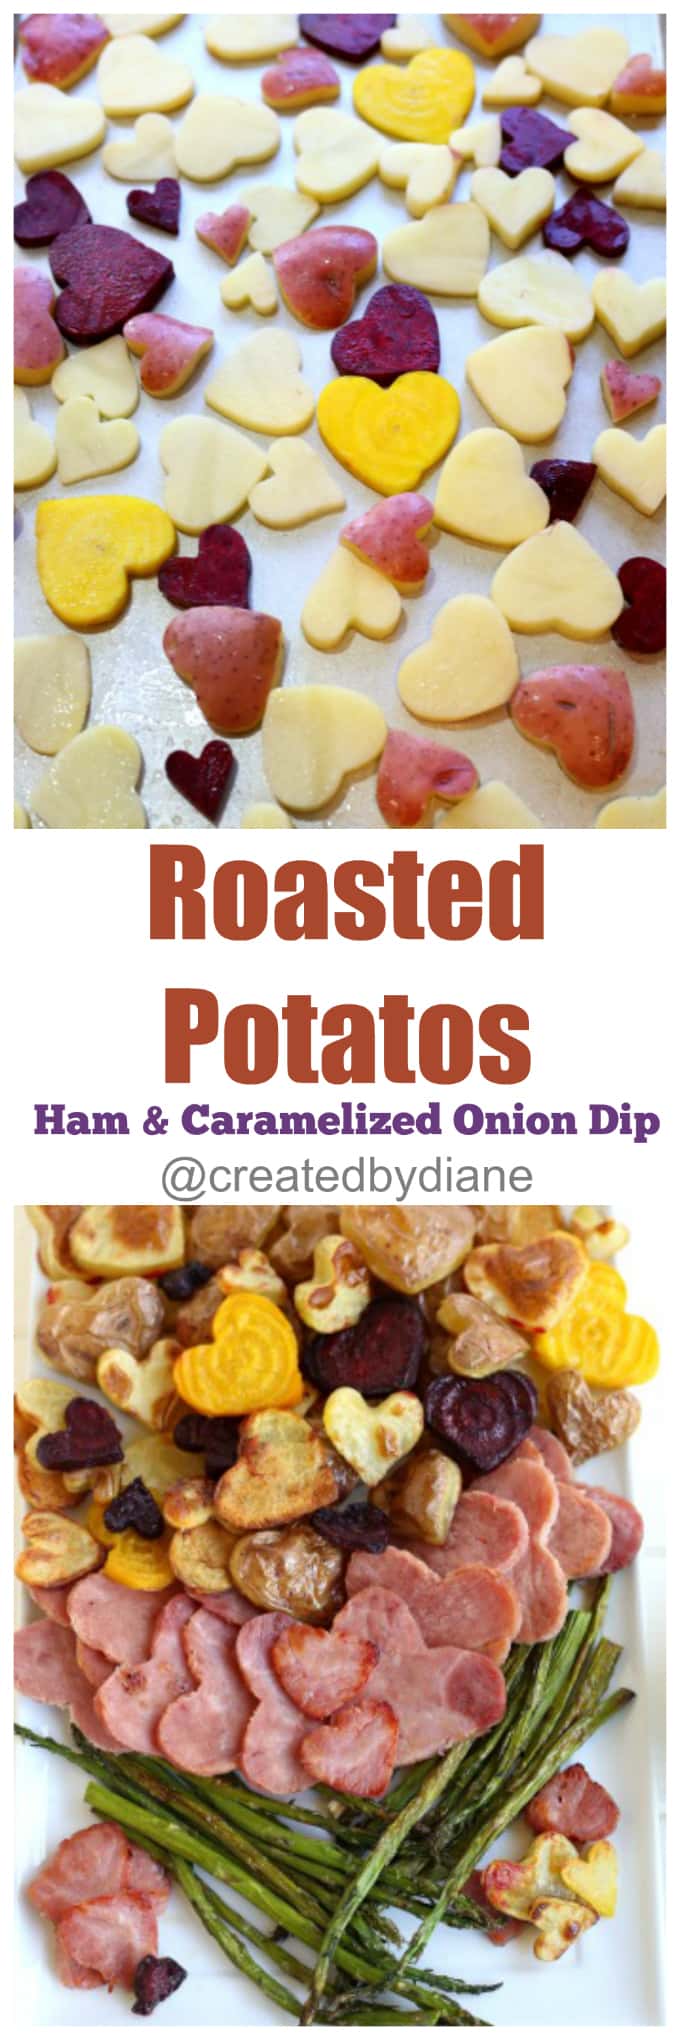 roasted-potatoes-with-ham-and-caramelized-onion-dip-createdbydiane